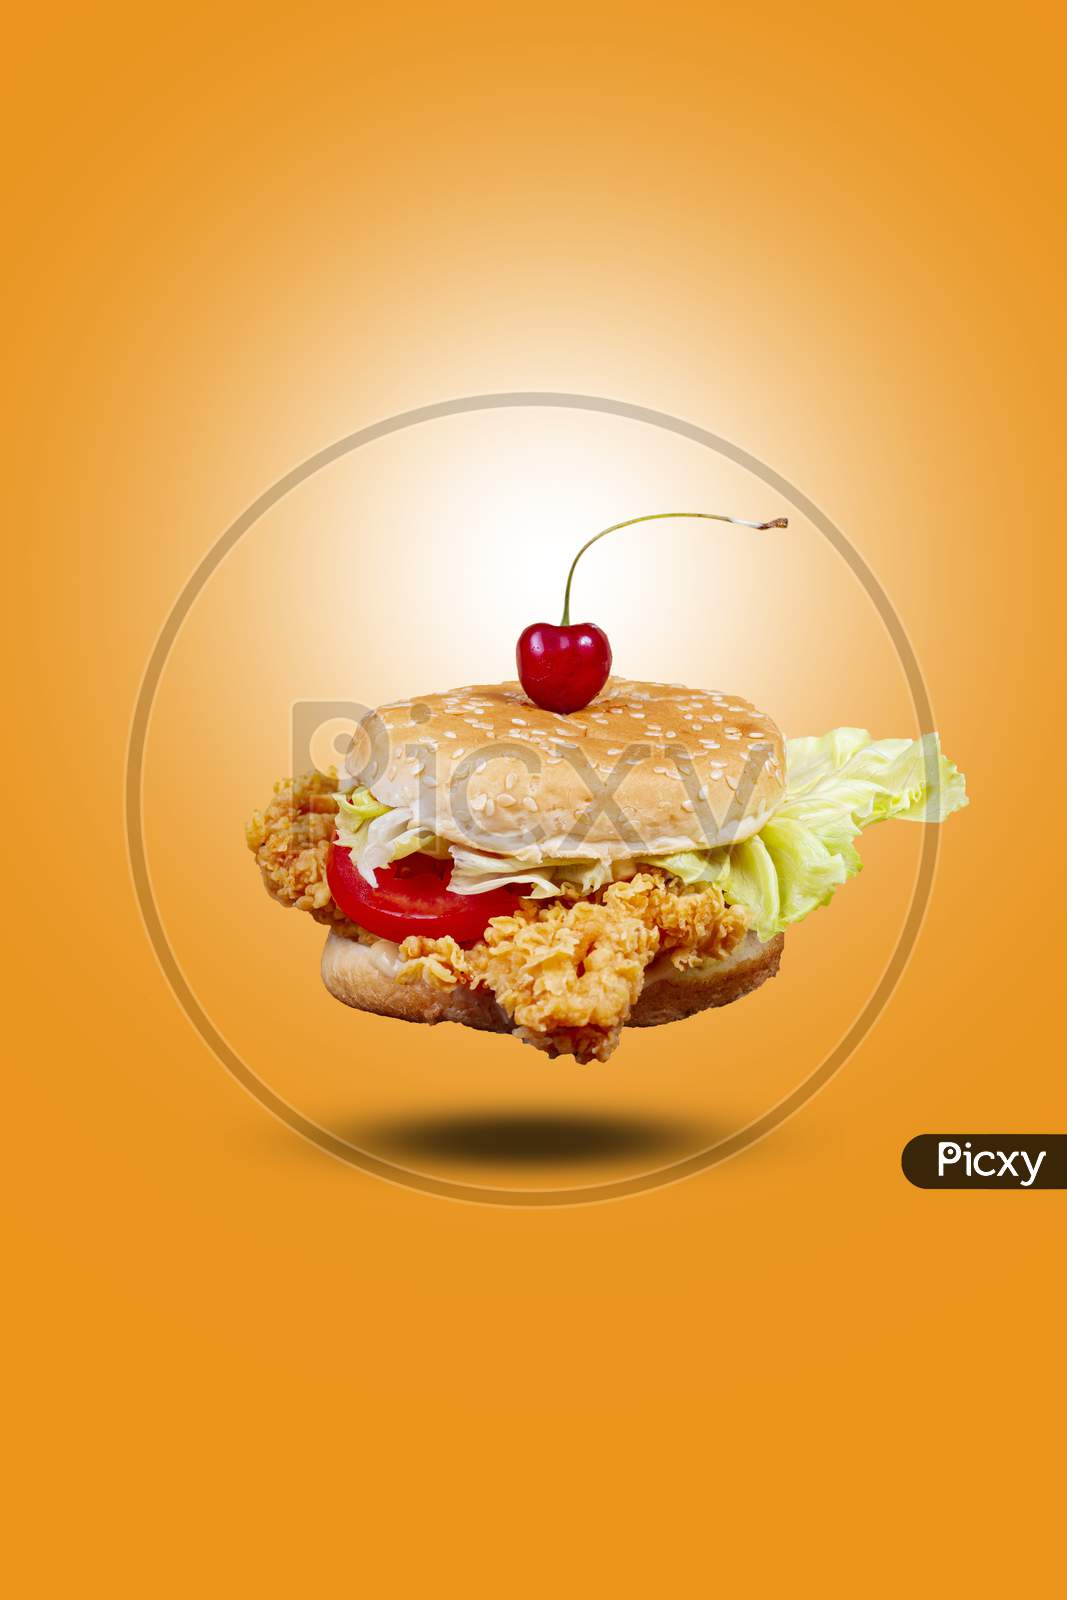 Juicy Flying Fish Burger, Hamburger Or Cheeseburger With One Fish Patties. Concept Of American Fast Food. Copy Space